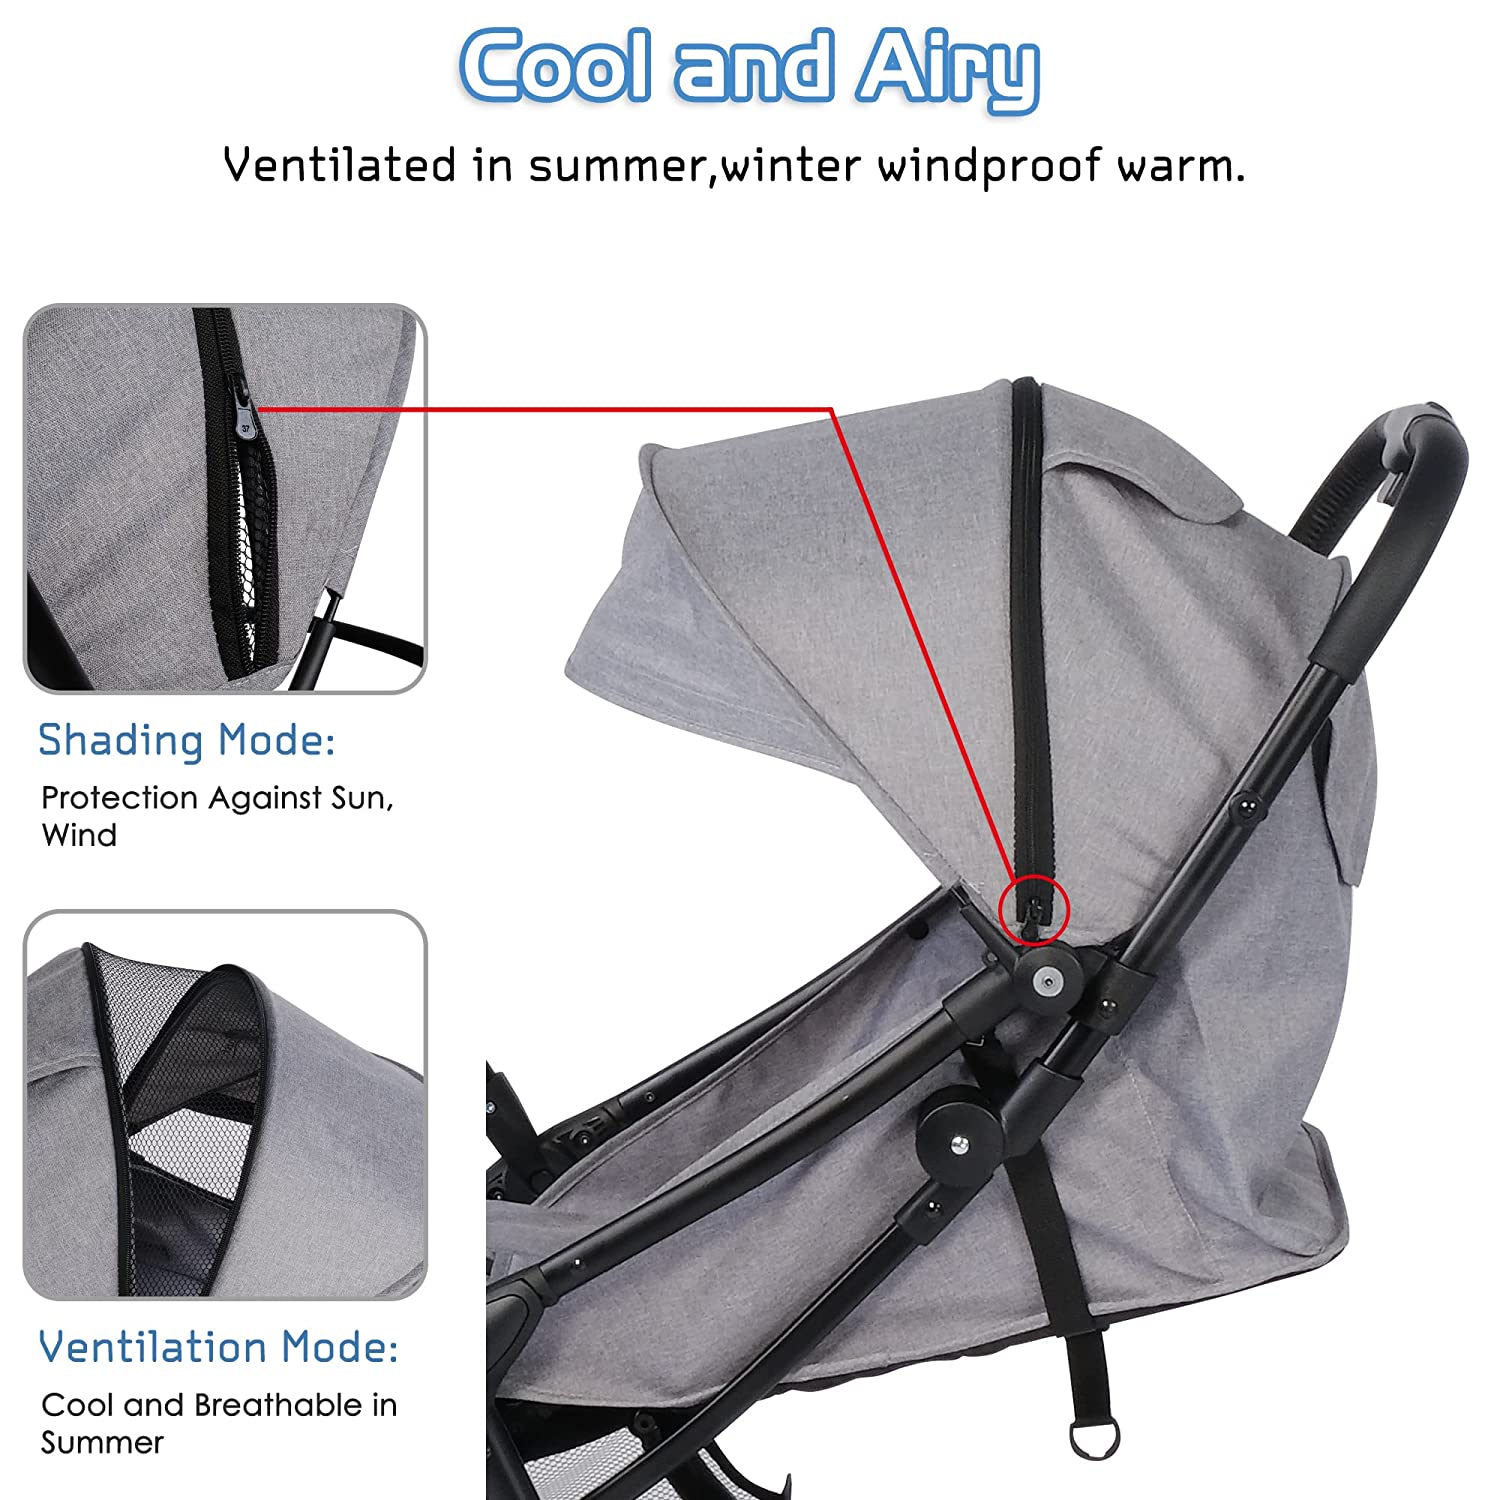 Compact Travel Baby Stroller for Airplane, One-Hand  Fold Lightweight Stroller w/ Adjustable Backrest and Canopy